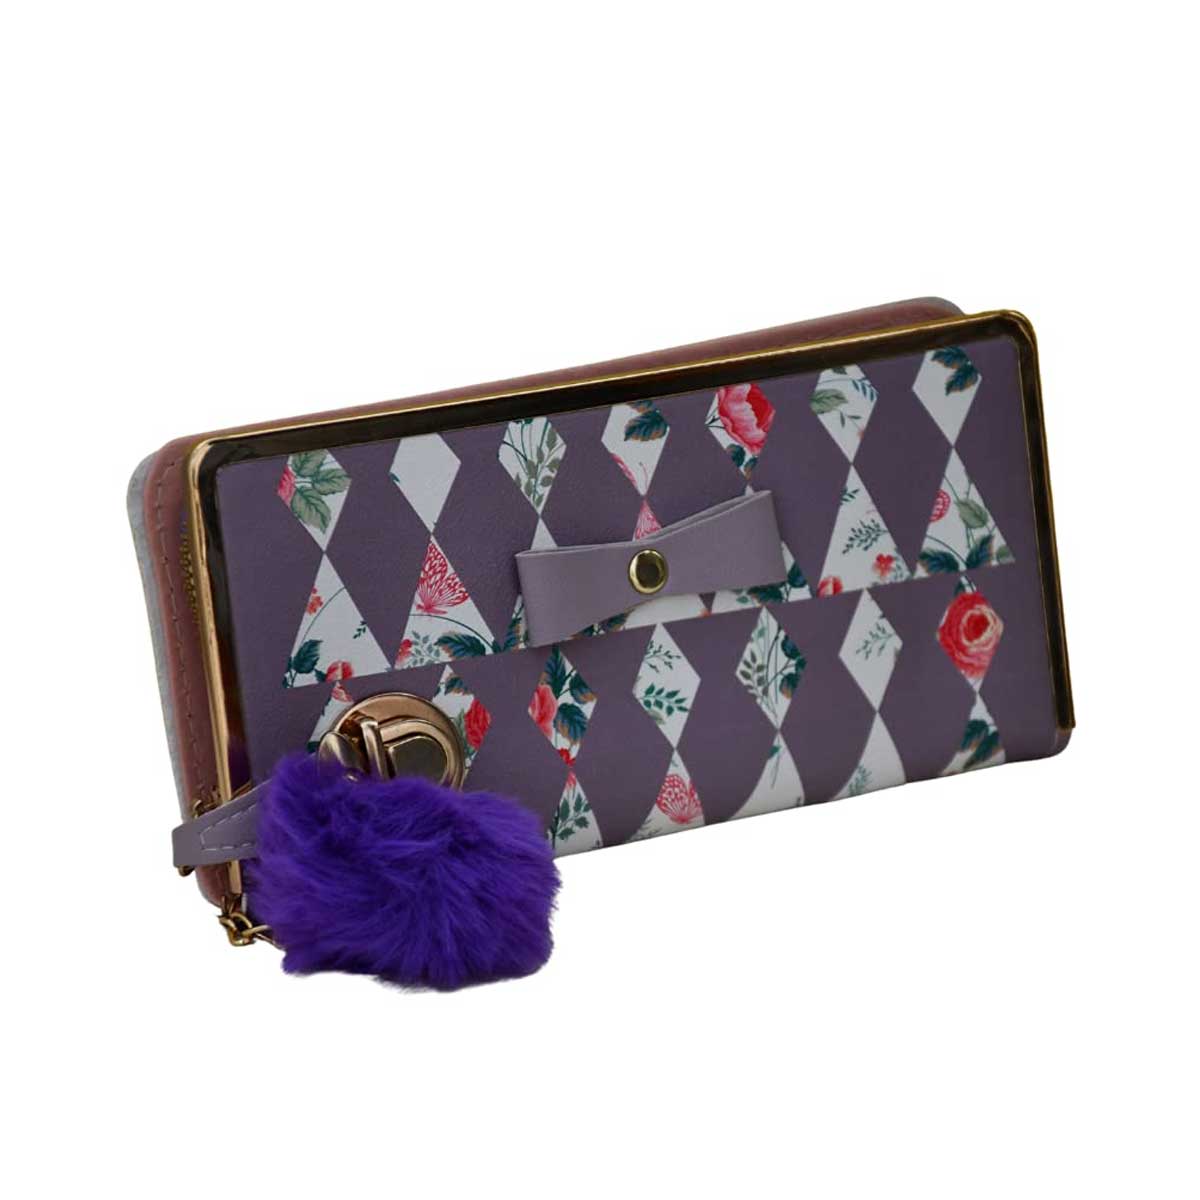 Ladies clutch bag small purse for women on sale at lowest price – MONTISA